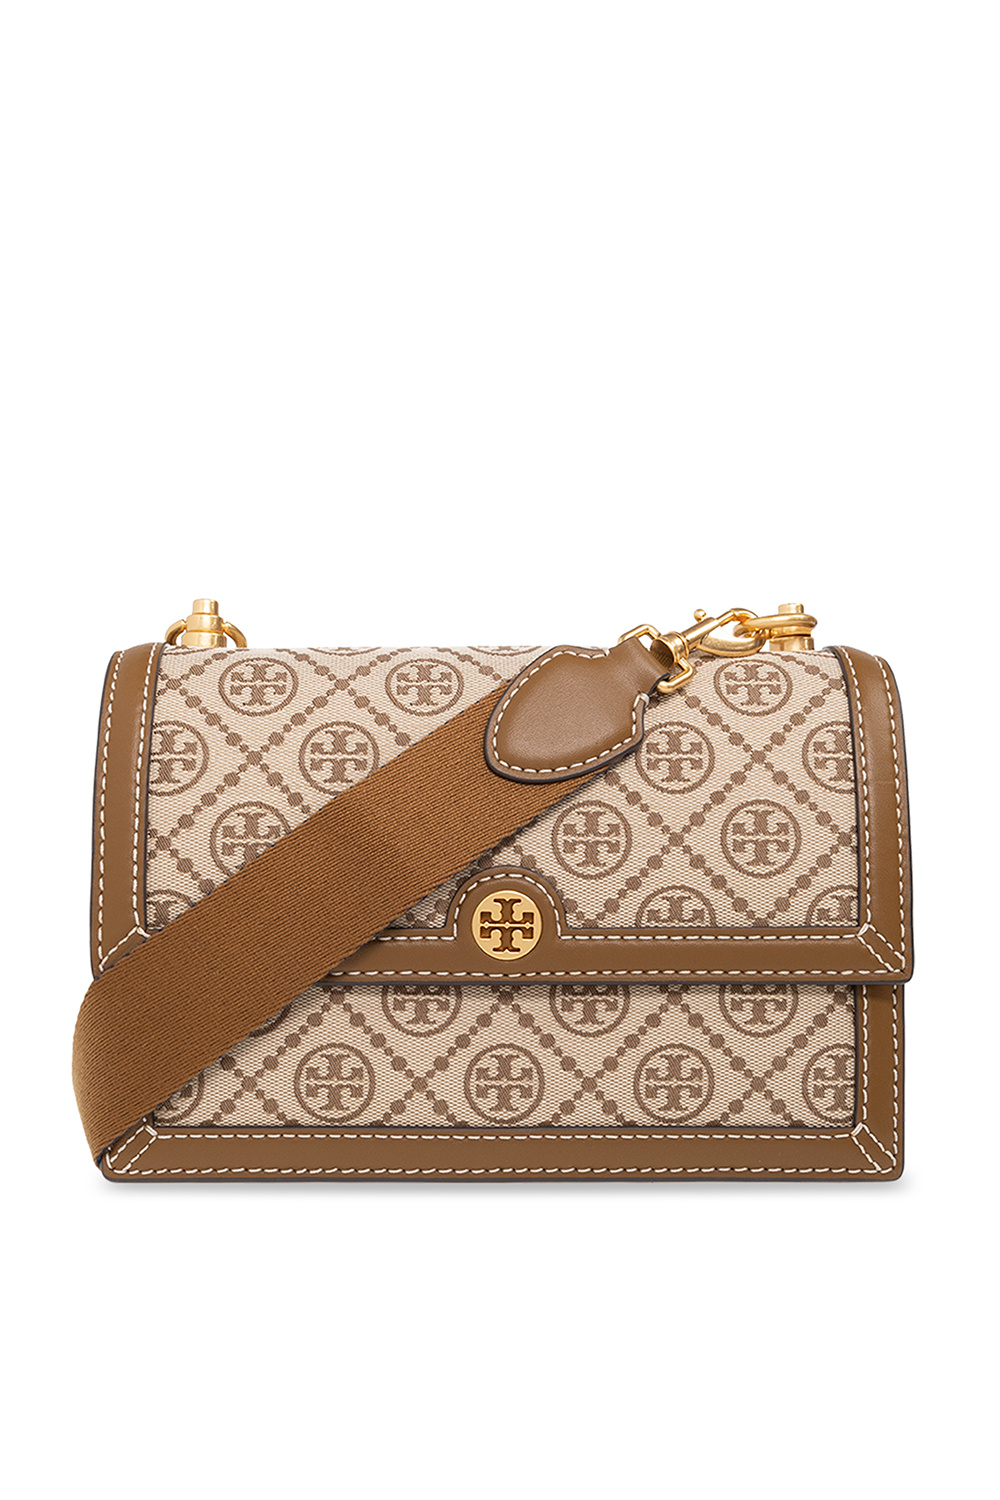 Totes bags Tory Burch - Saffiano leather tote - 11169775001